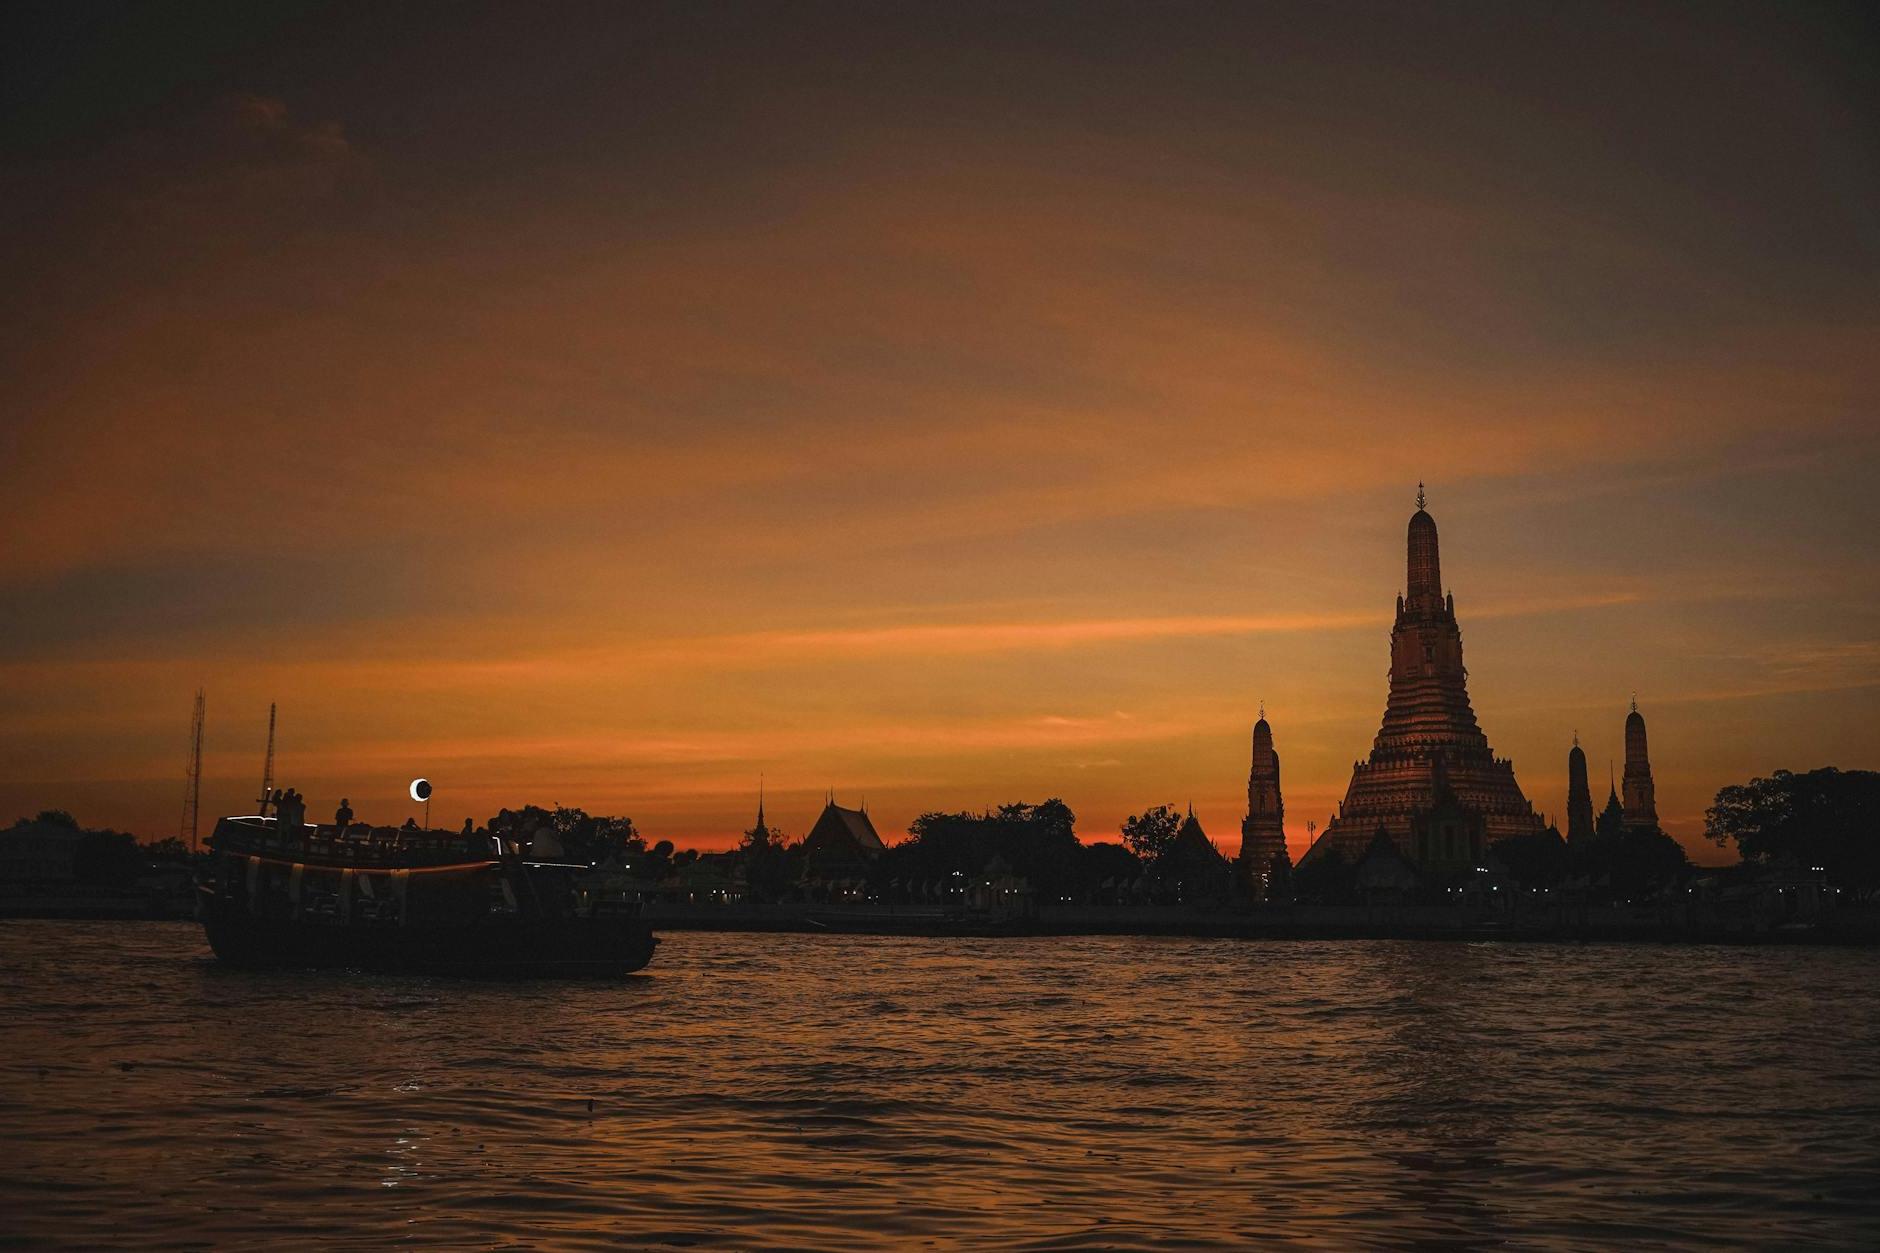 The Wat Arun by the Chao Phraya River During Sunset